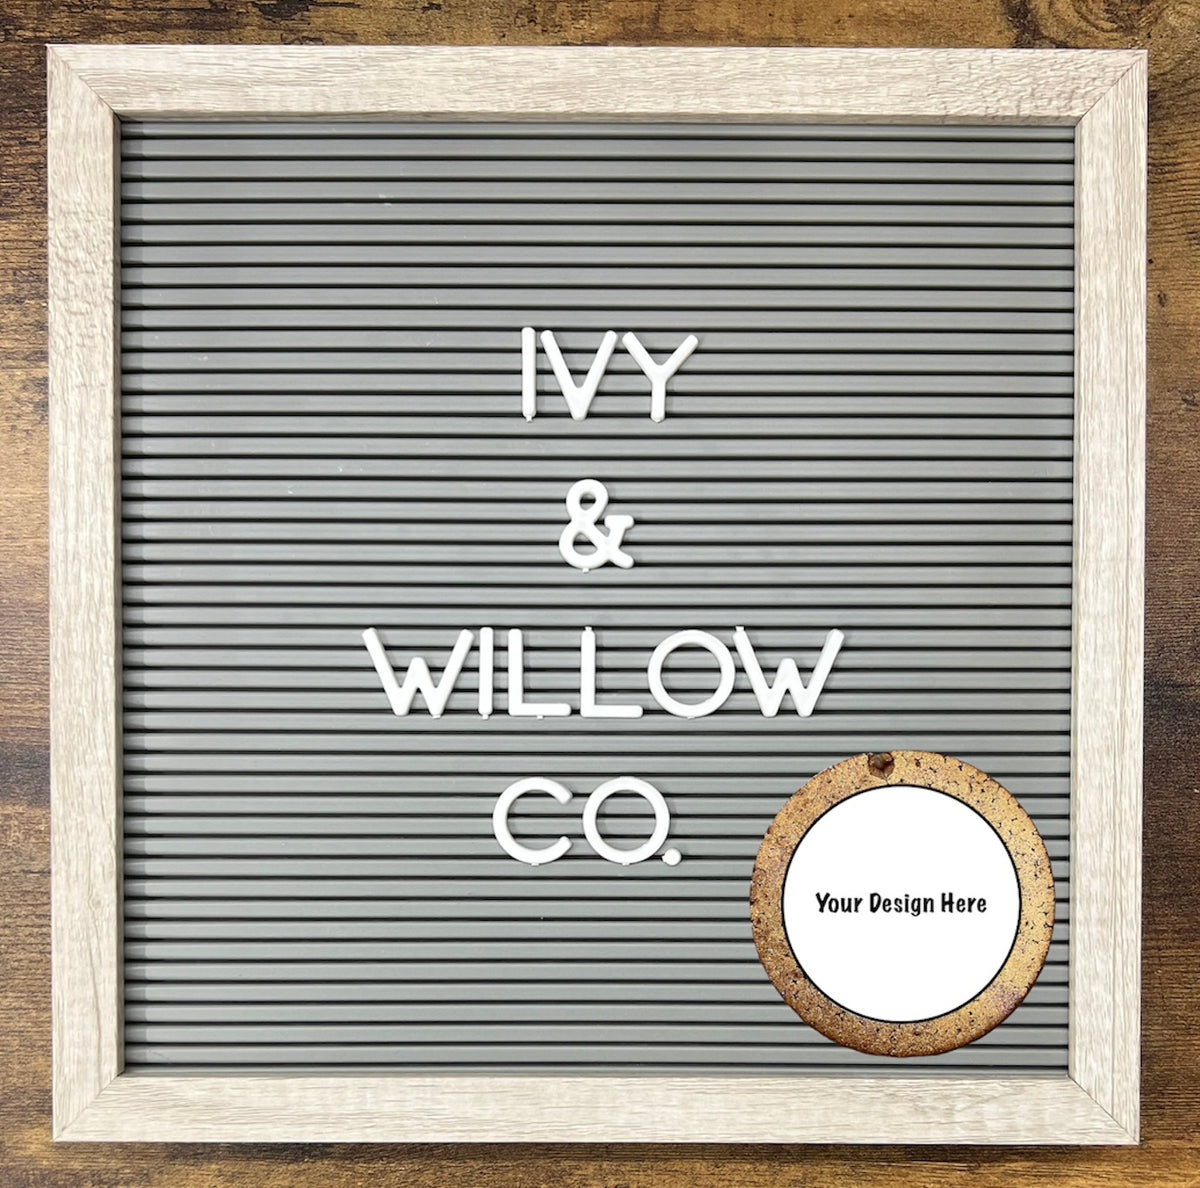 Mama Freshie – Ivy & Willow Co.